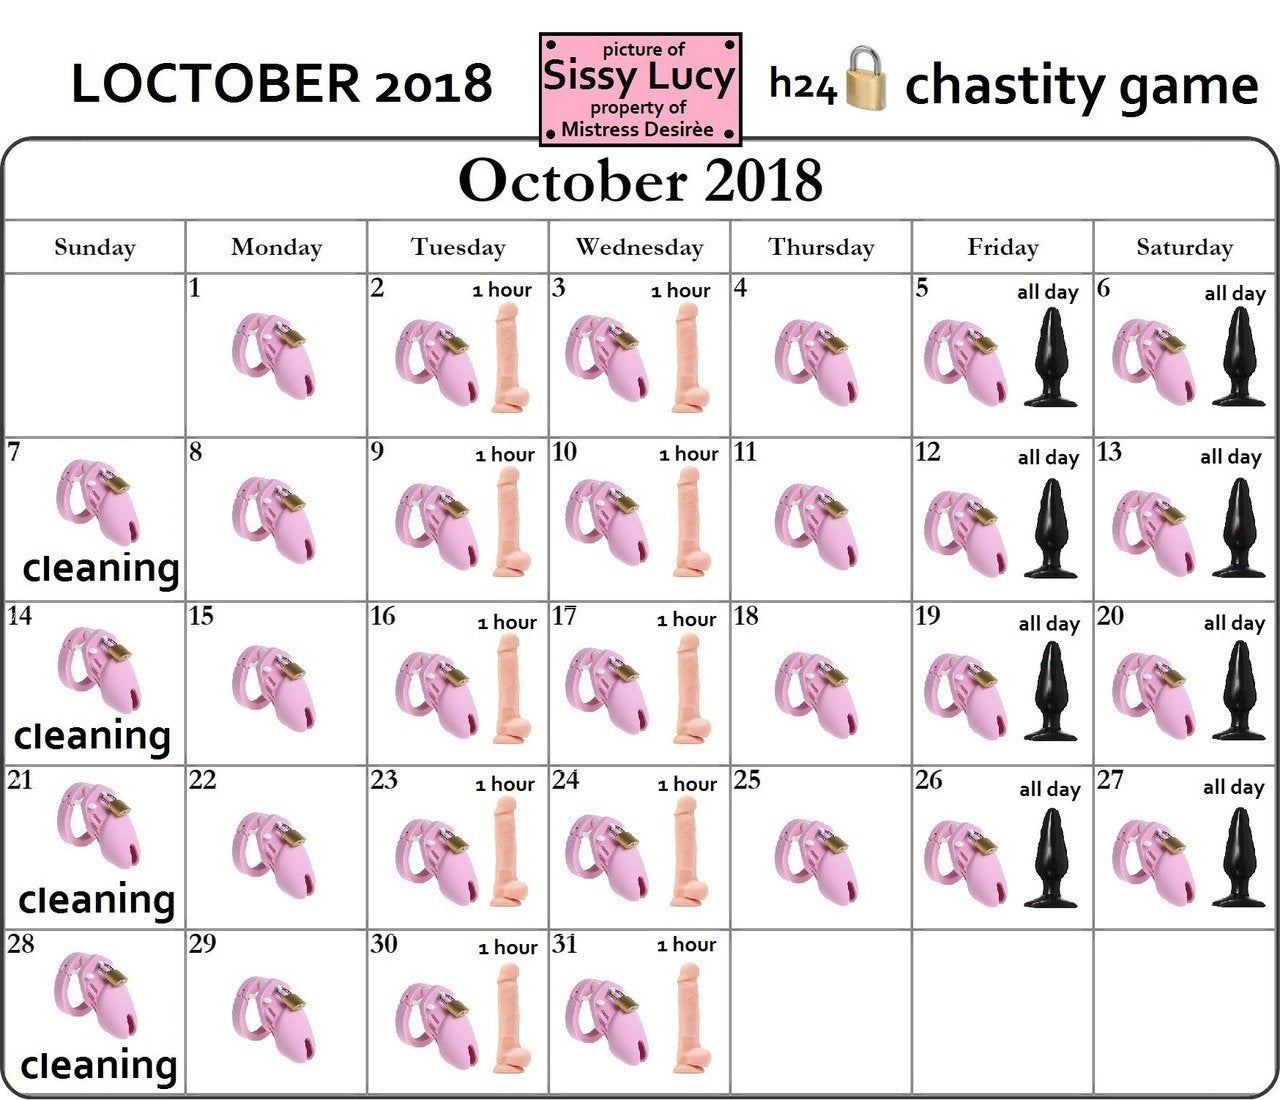 Oldie reccomend locktober month chastity preview